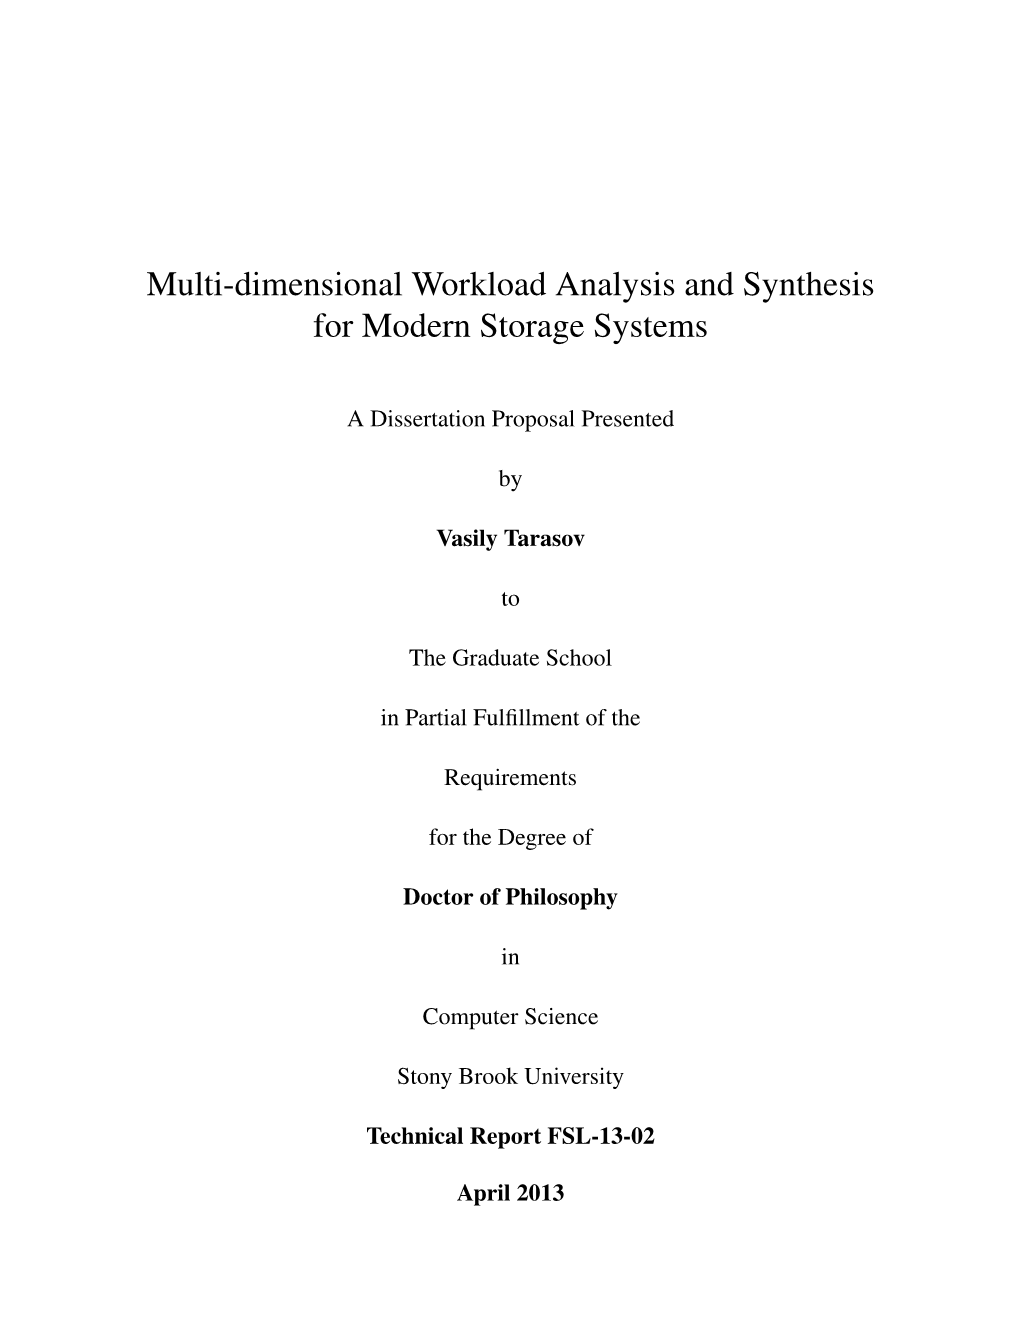 Multi-Dimensional Workload Analysis and Synthesis for Modern Storage Systems